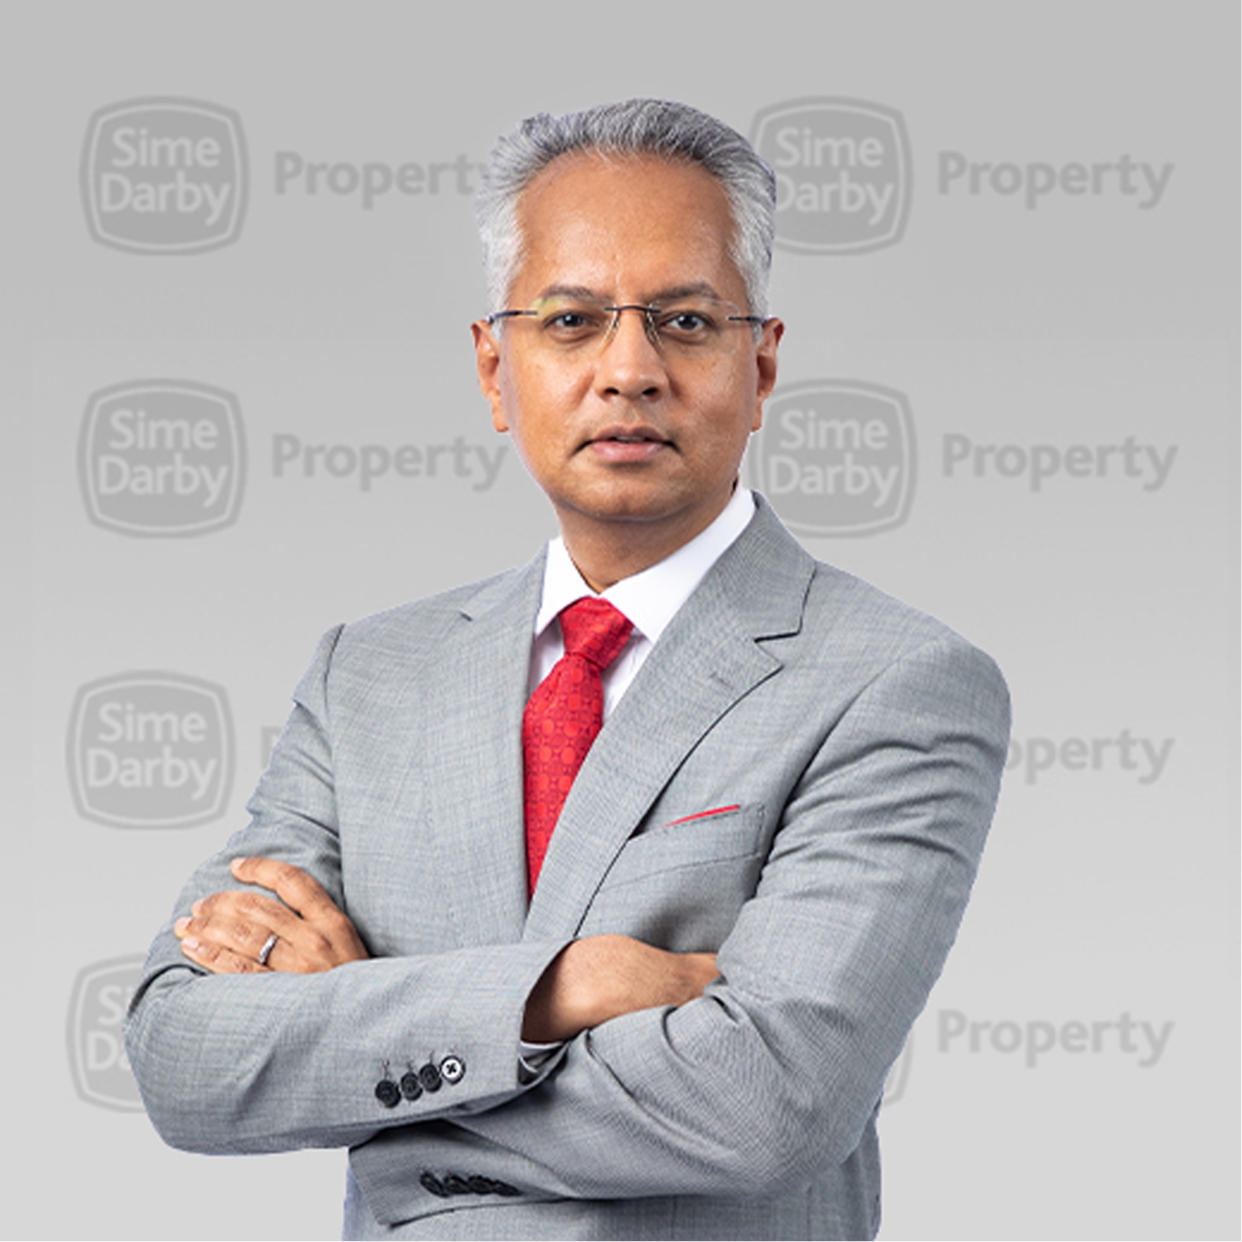 Sime Darby Property and TNB Launch Joint Venture to Empower Sustainability Agenda in Malaysia